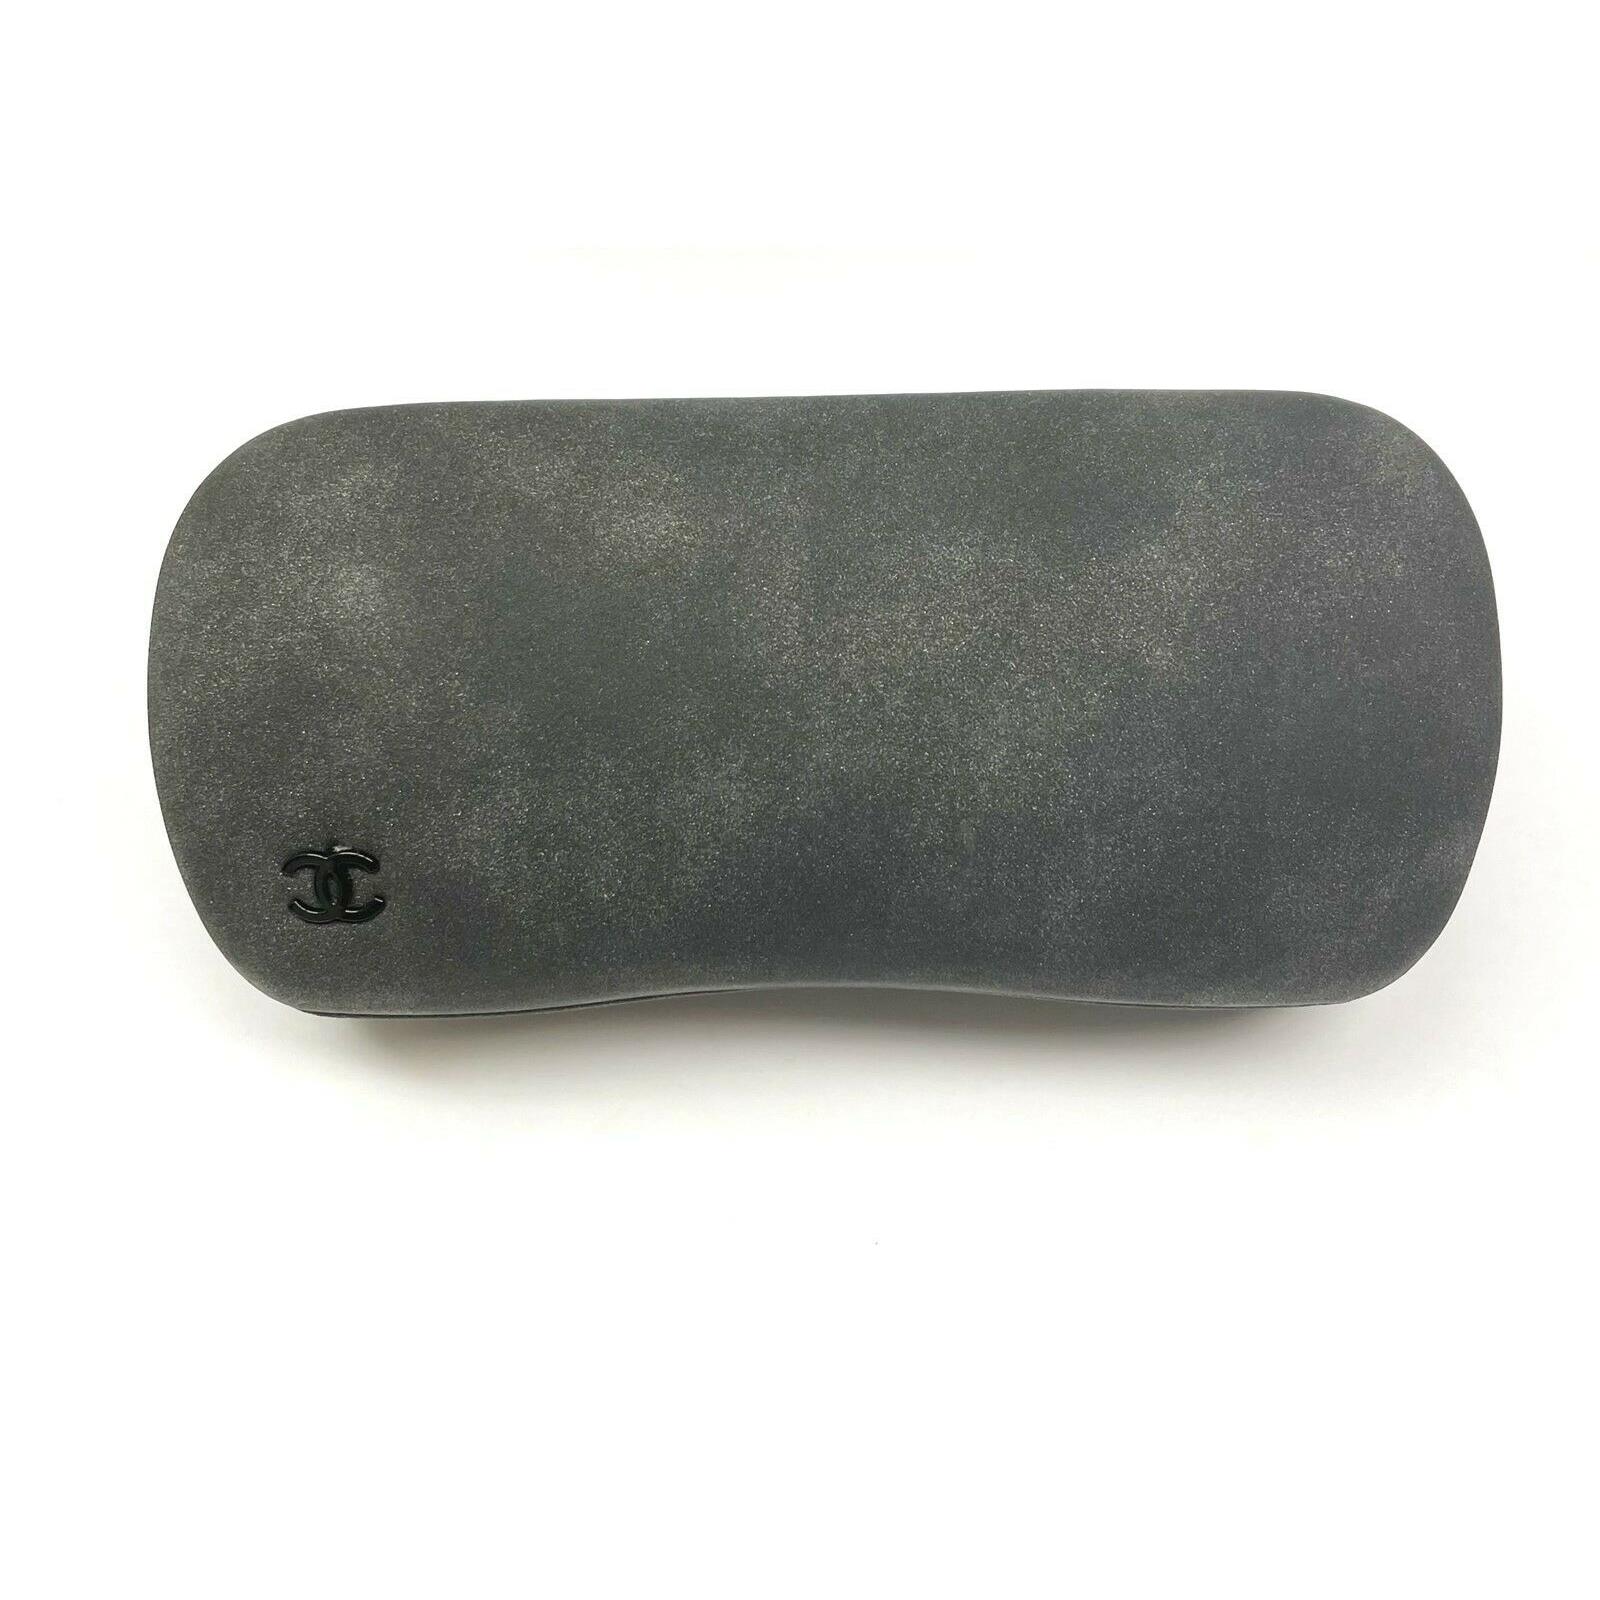 Chanel Sunglasses Glasses Hard Case Clamshell Charcoal Gray Suede - Large Case